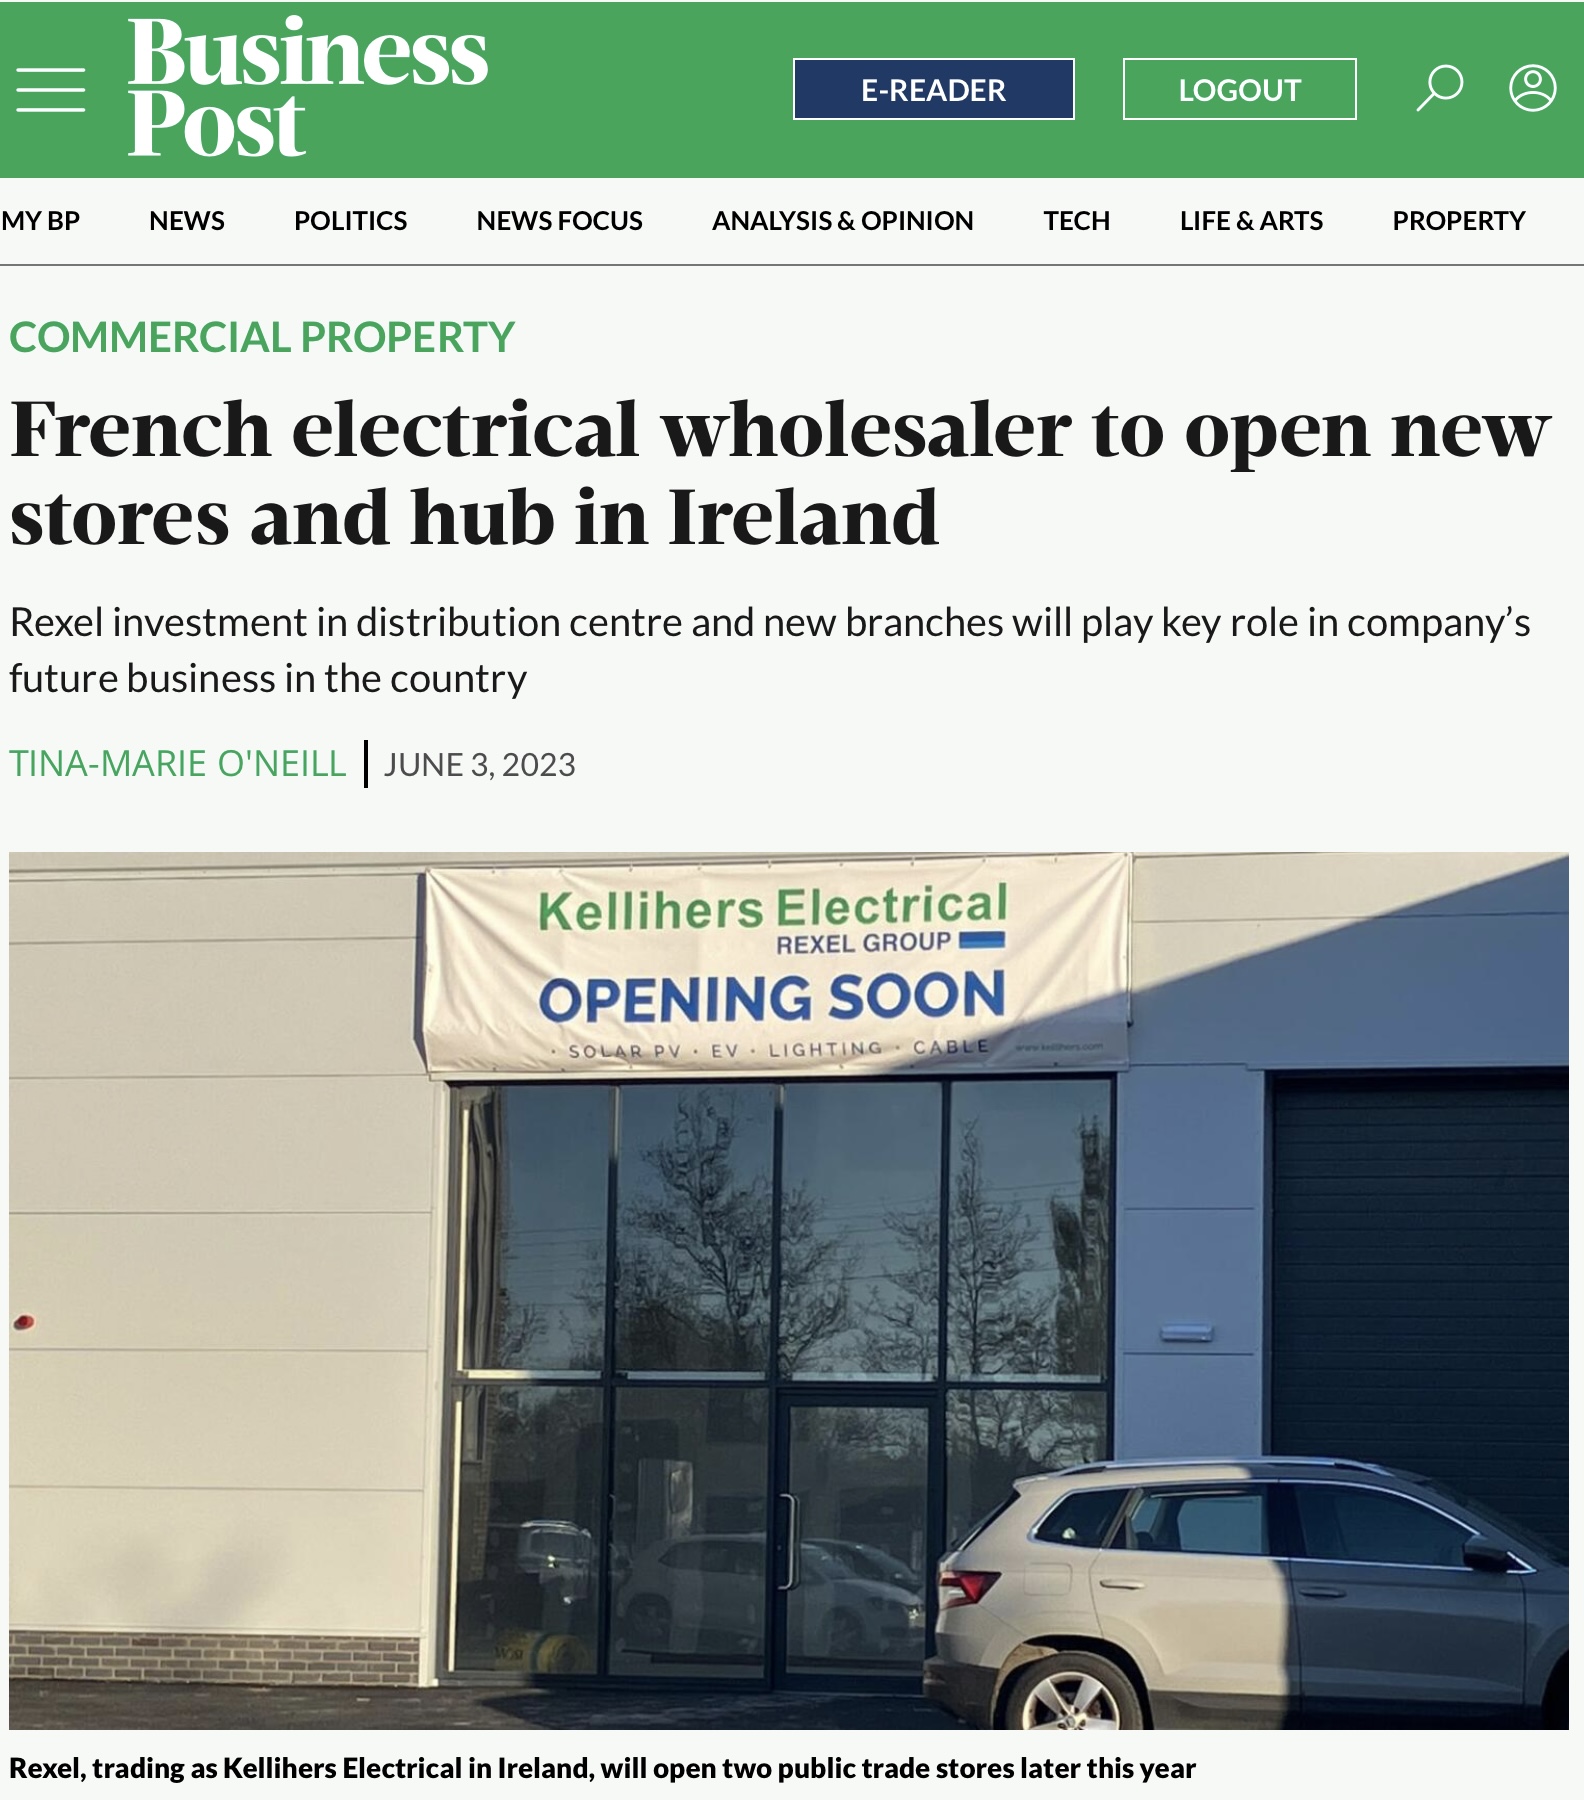 French electrical wholesaler to open new stores and hub in Ireland